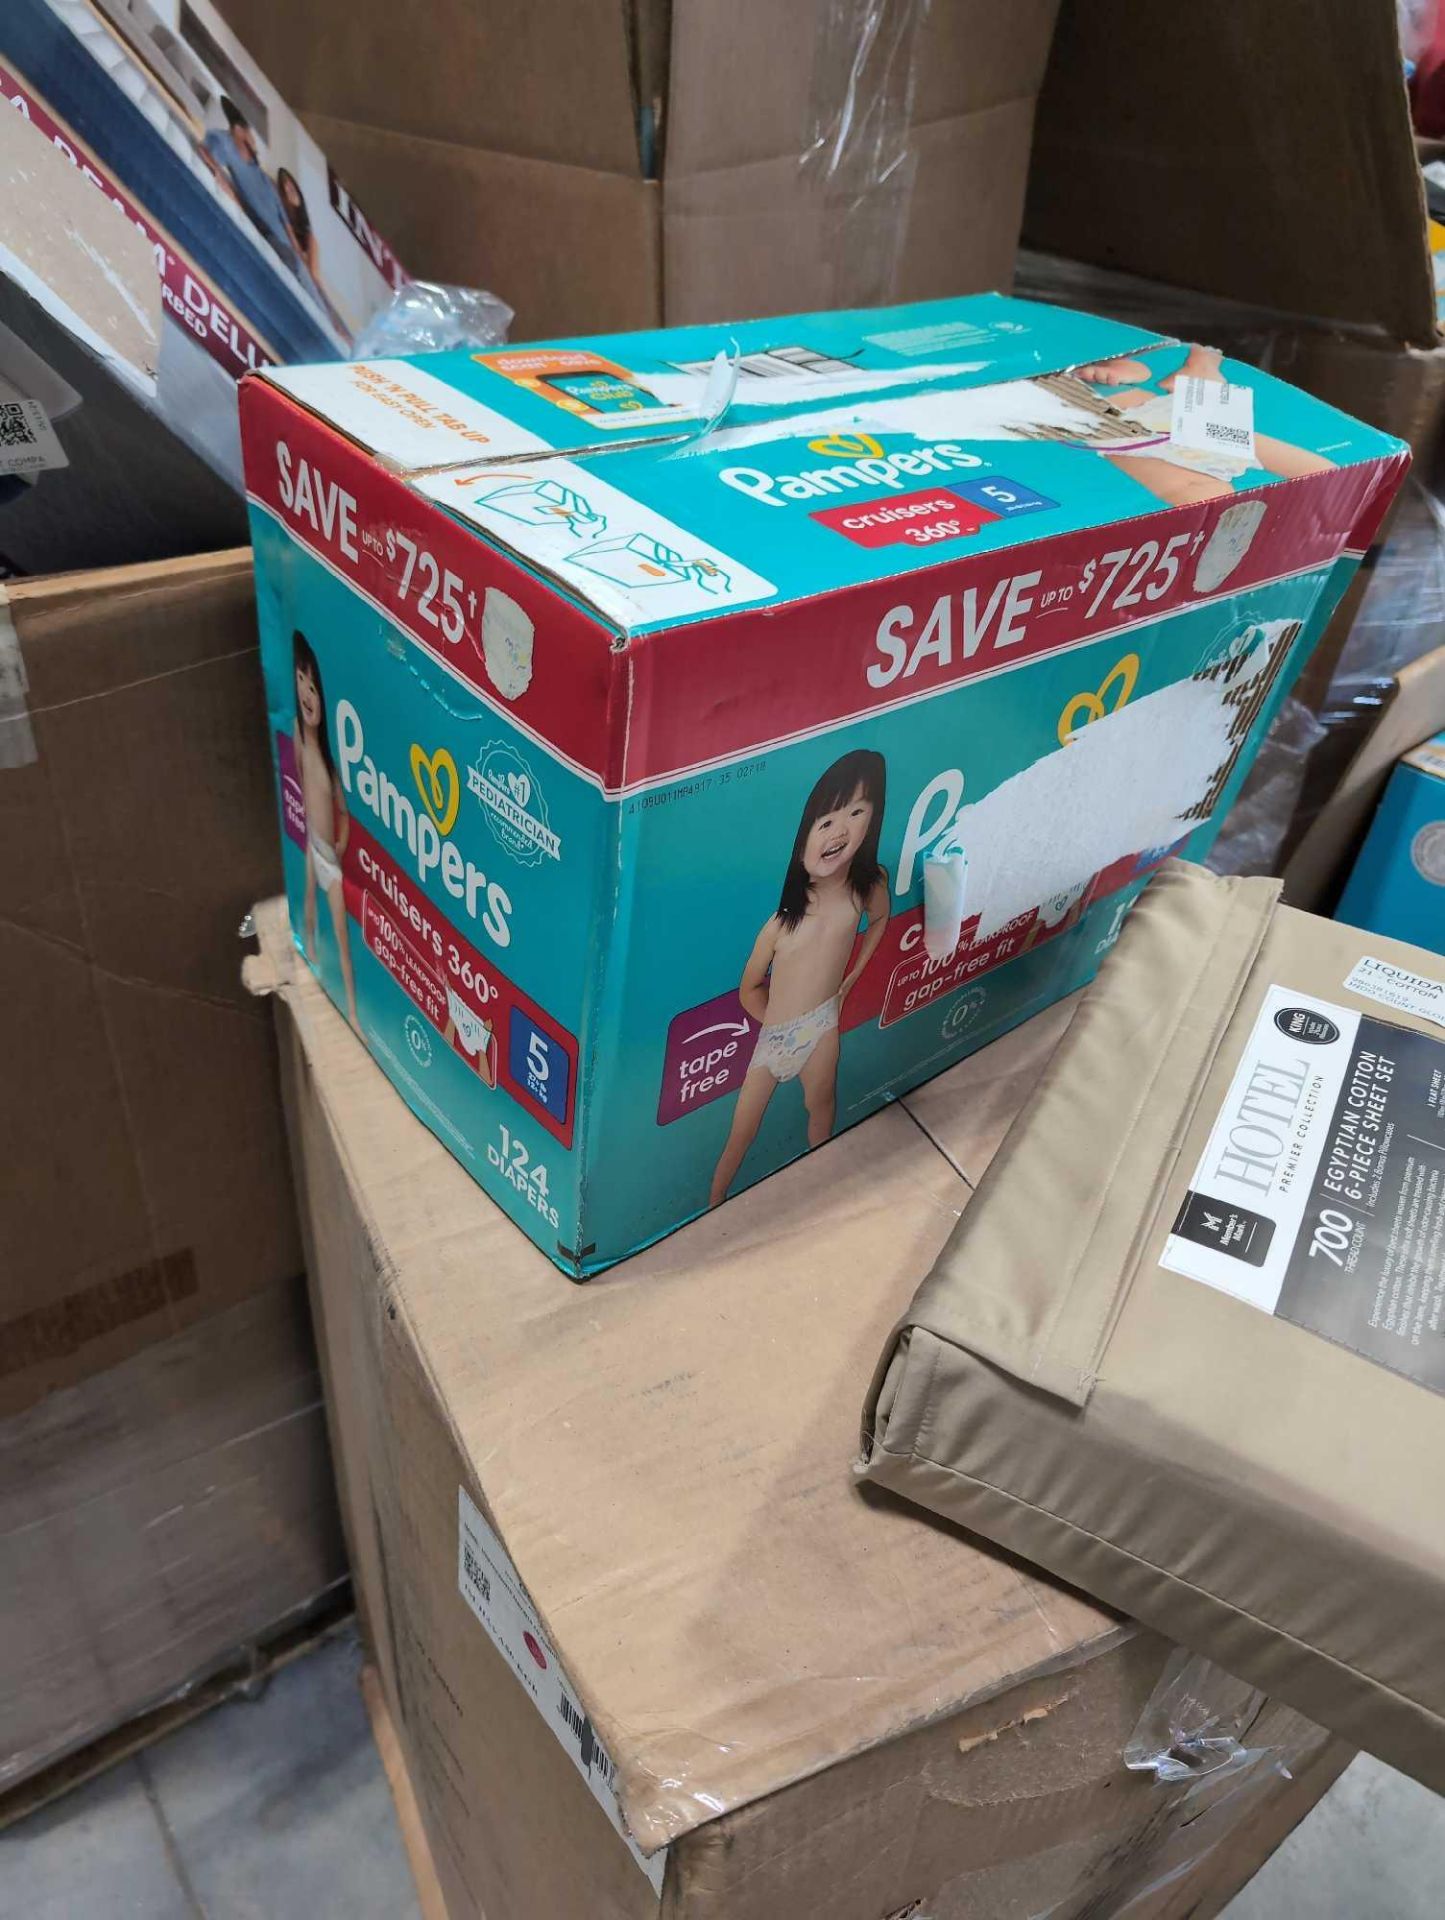 Big box store in a box, pampers, Sheets, Blanket, Intex blow up bed, swiffer wet cloths, gold fish, - Image 3 of 20